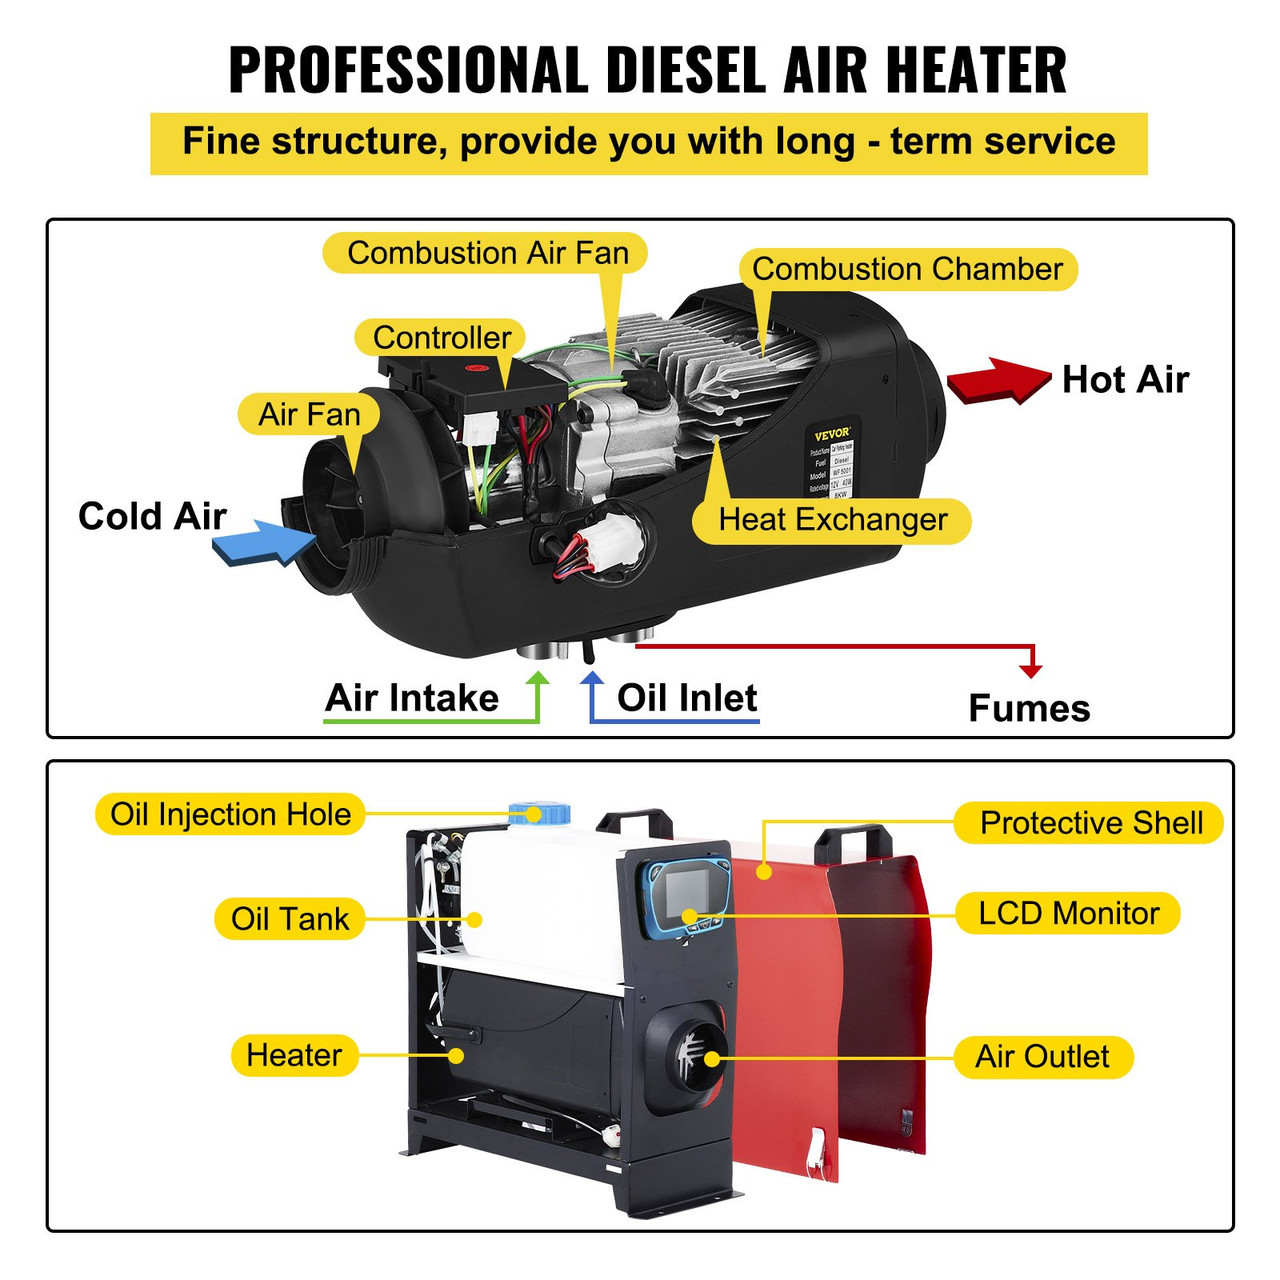 Diesel Air Heater, 12 V 5KW All in One Bunk Parking Heater, with Remote Control, LCD Thermostat Monitor, Silencer and Large Air Outlet for RV Trucks Bus and Trailer